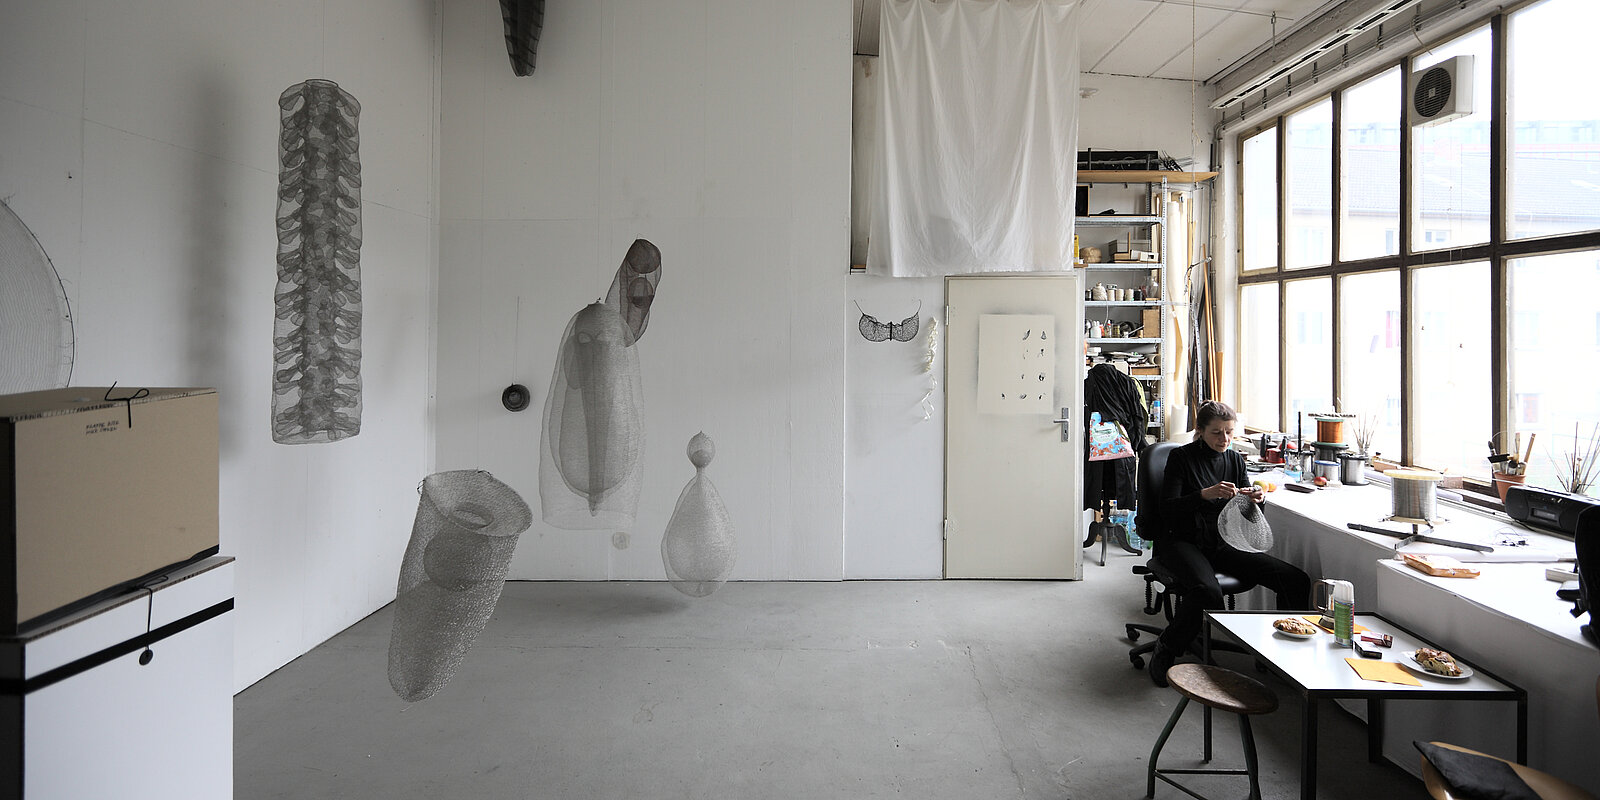 Luise Unger in her studio, Cologne 2015. Photo: Alistair Overbruck